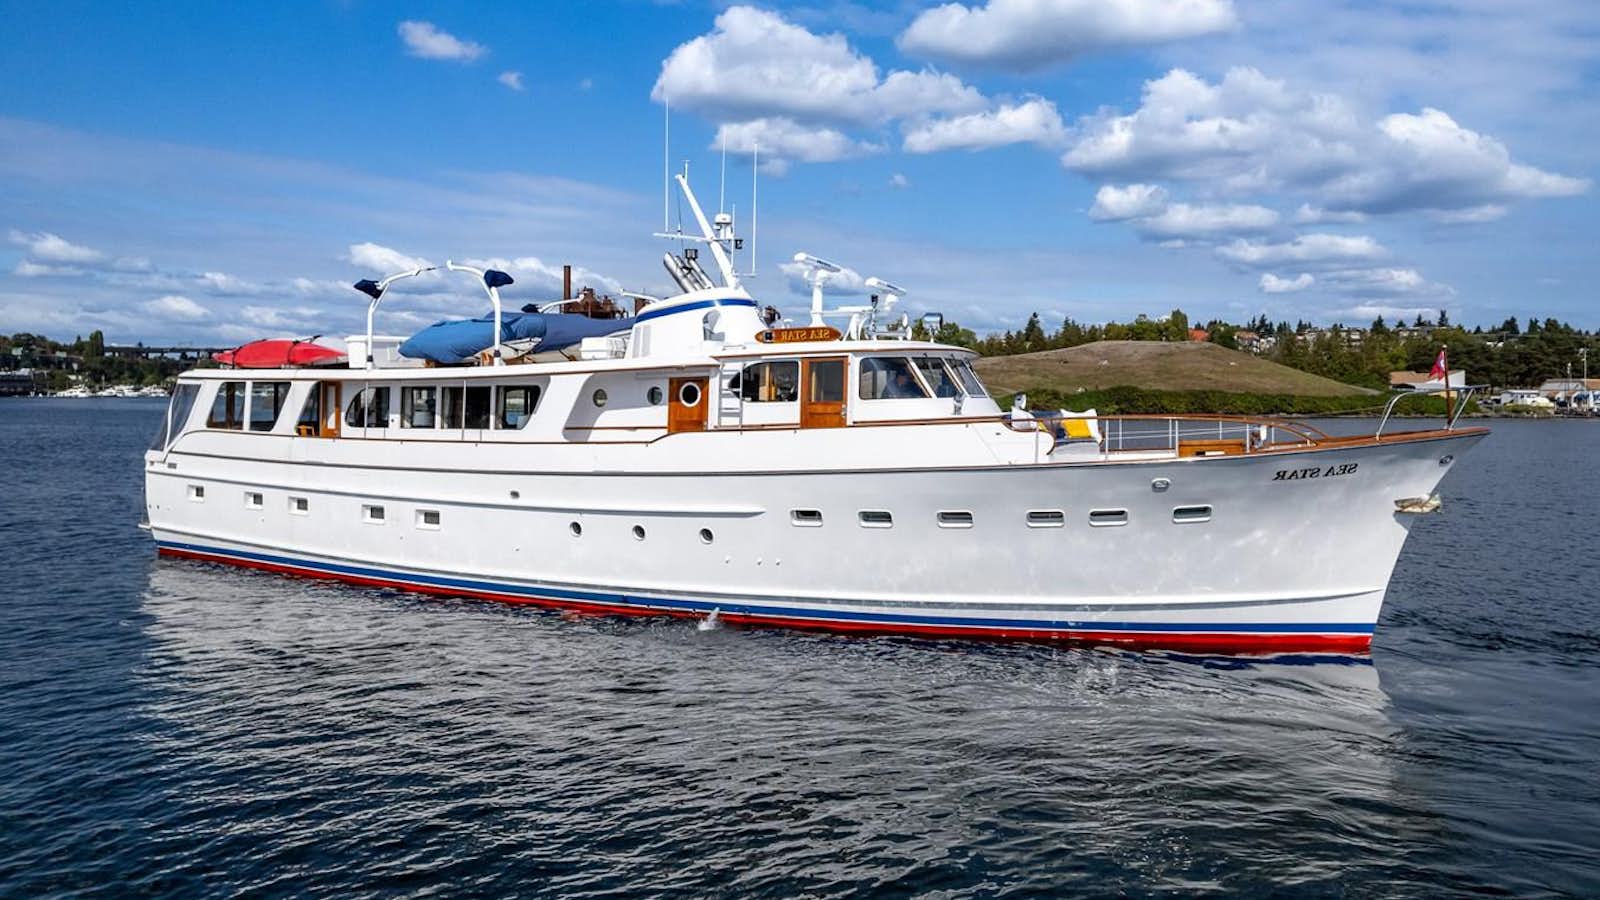 a boat on the water aboard SEA STAR Yacht for Sale